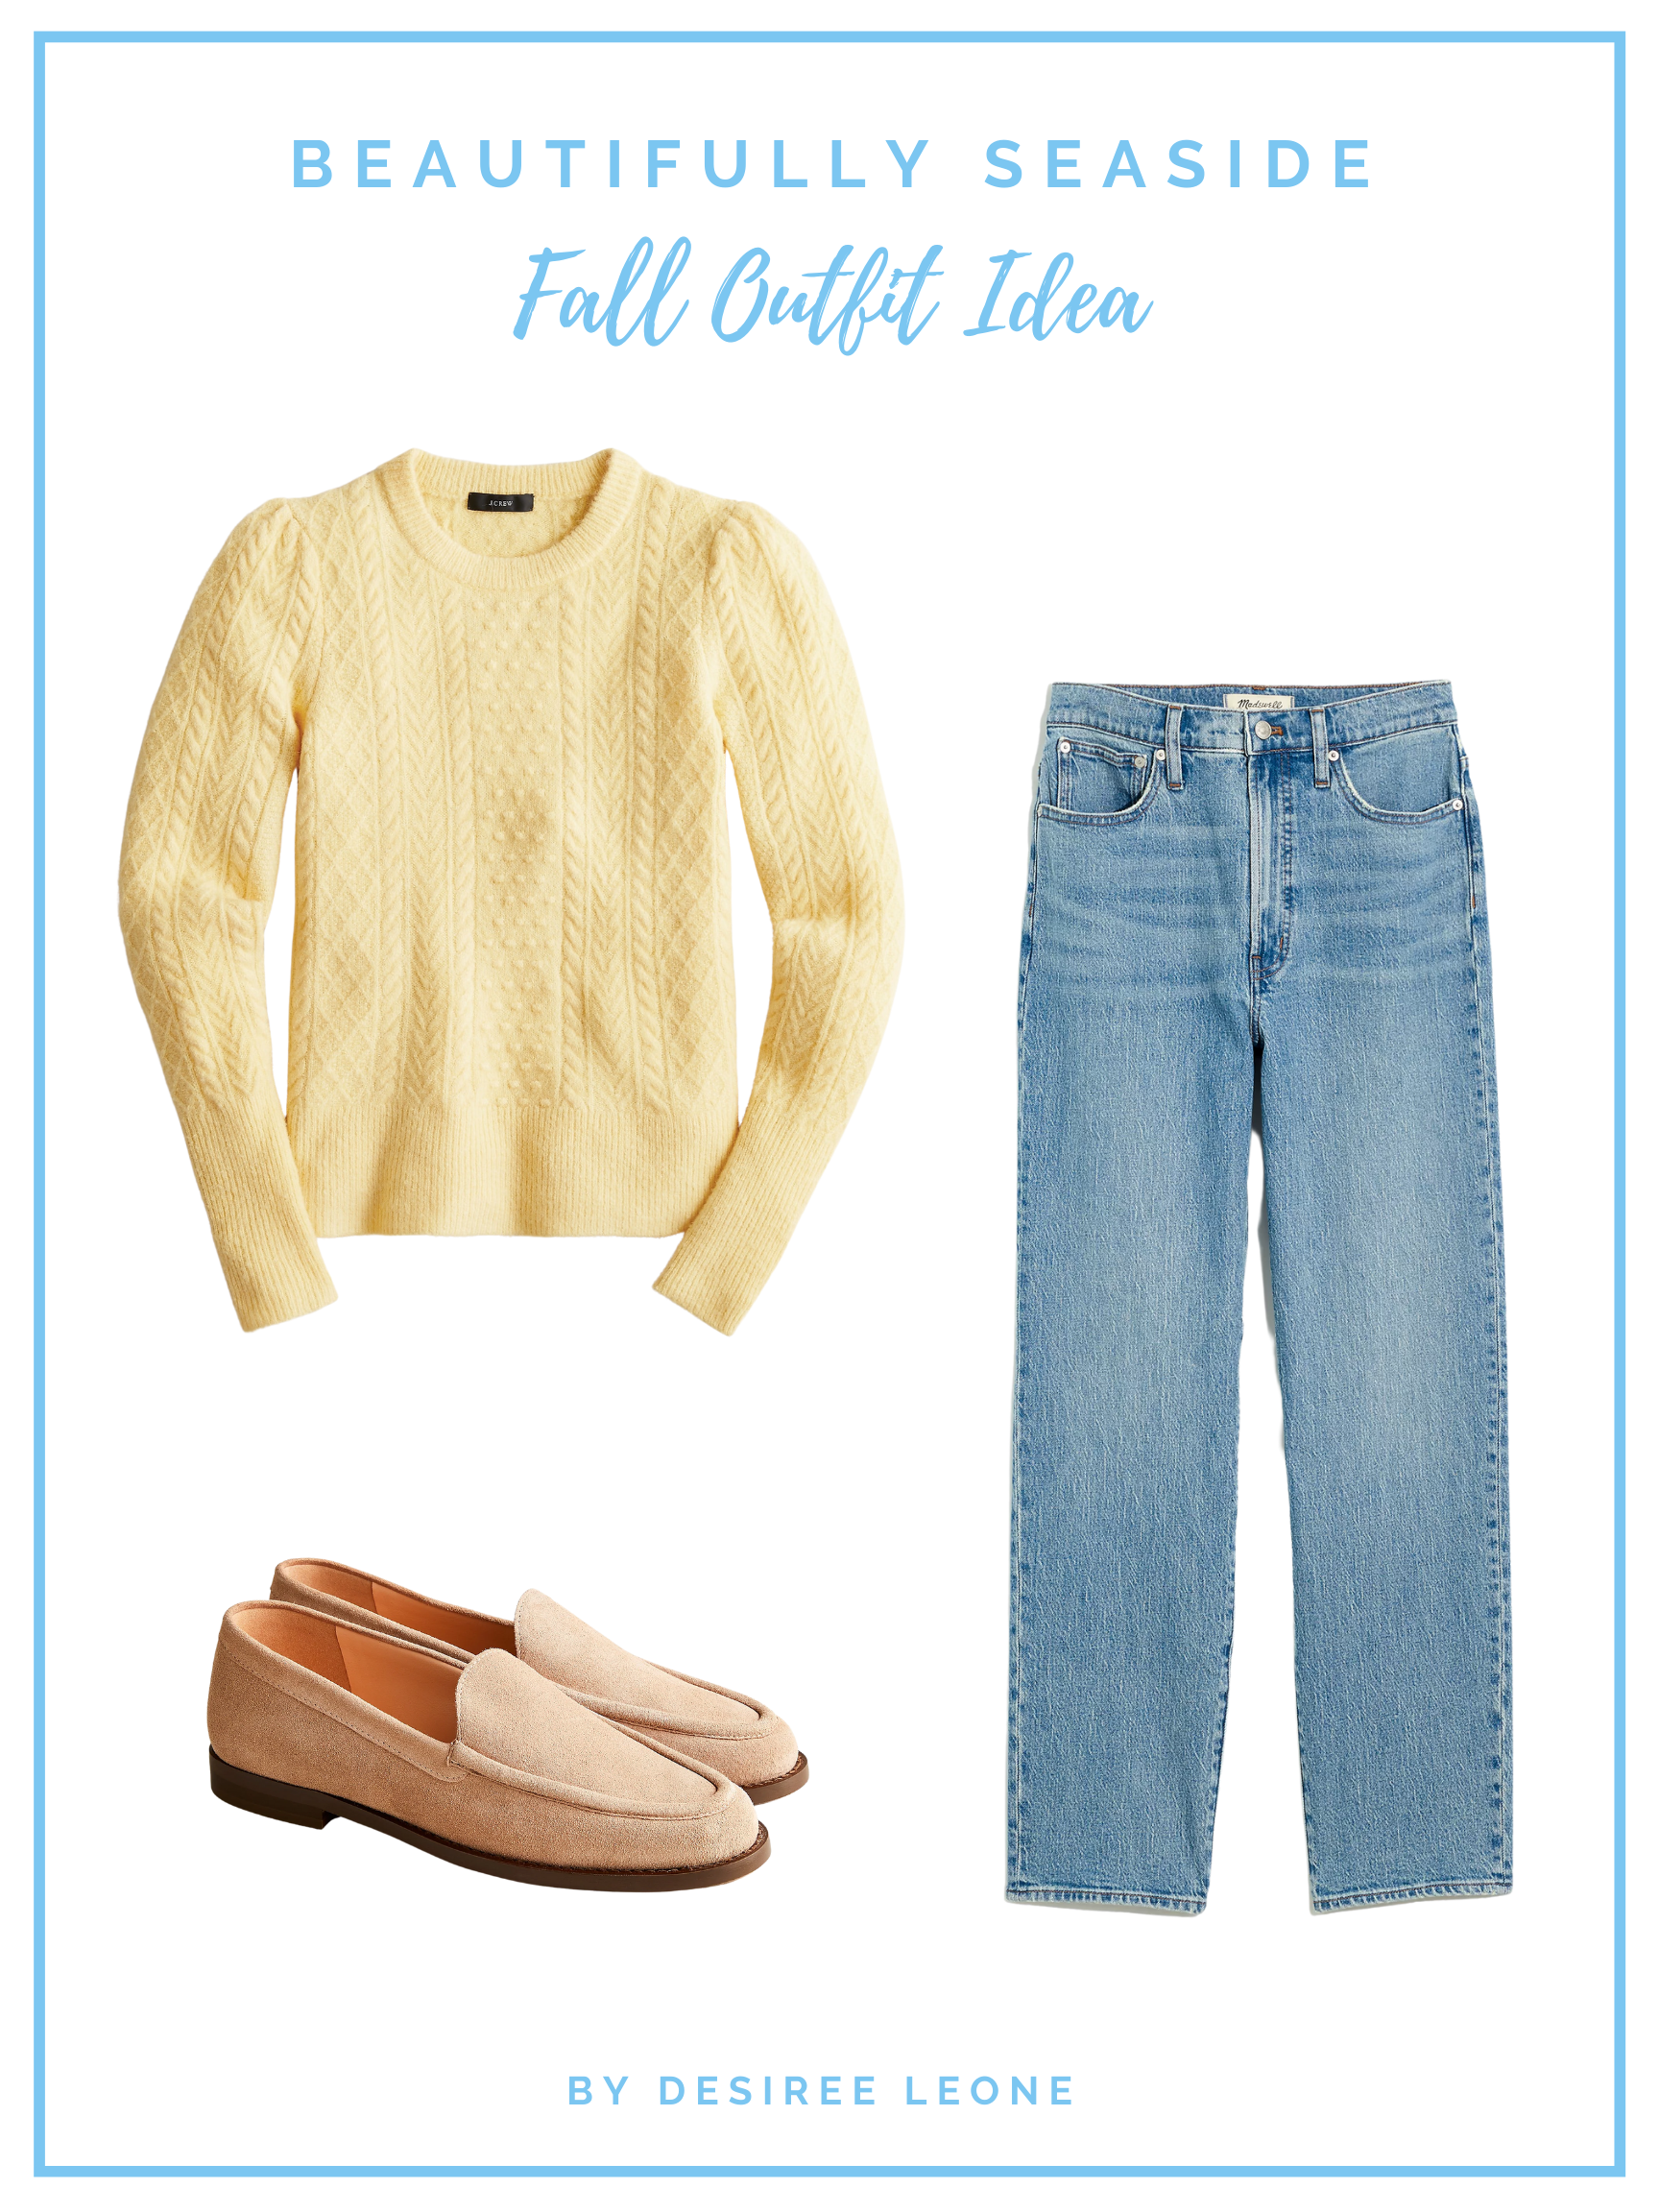 5 CASUAL FRIDAY FALL OUTFIT IDEAS FOR THE OFFICE - Beautifully Seaside